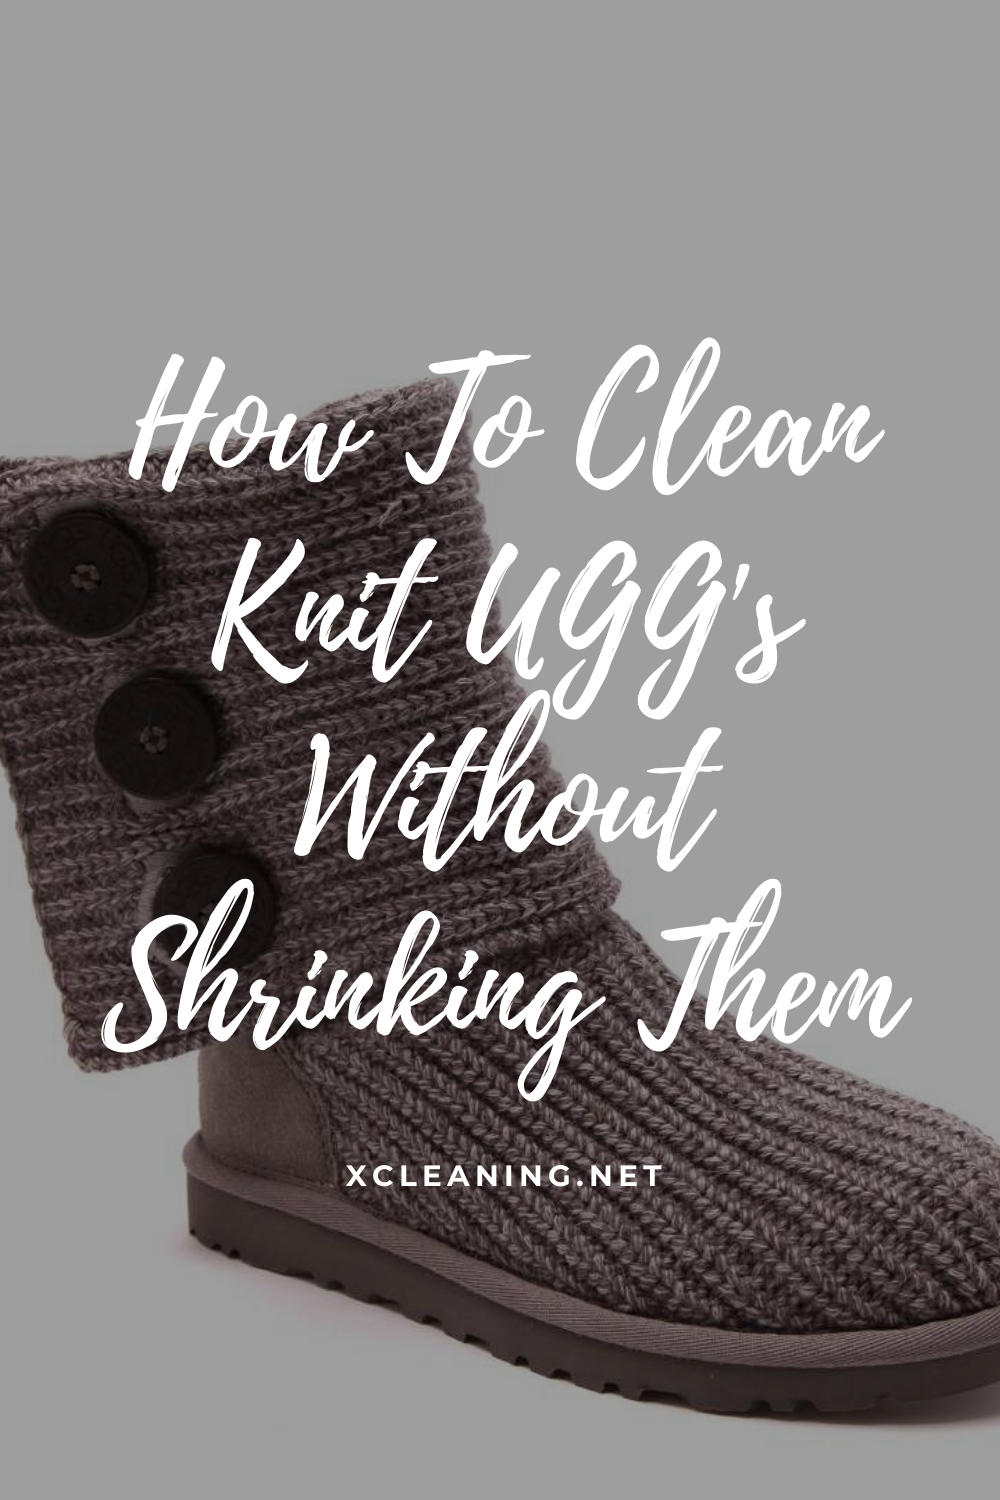 how to wash knit uggs